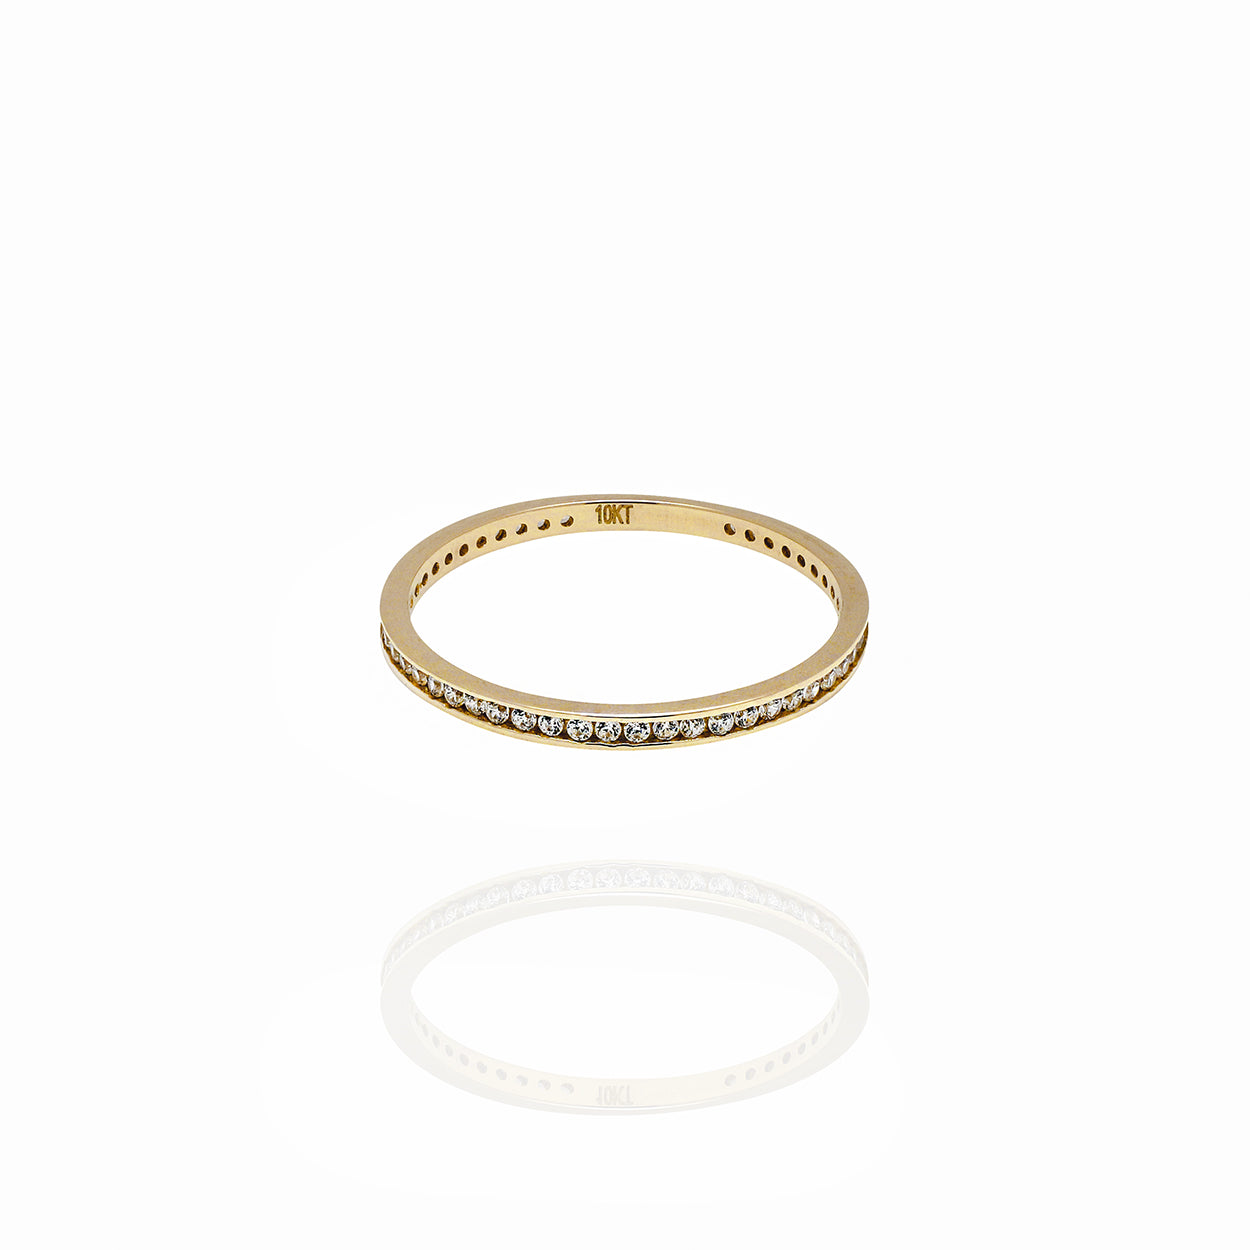 10kt Yellow Gold Eternity Style Band set with Cubic Zirconia and 2mm Wide 2